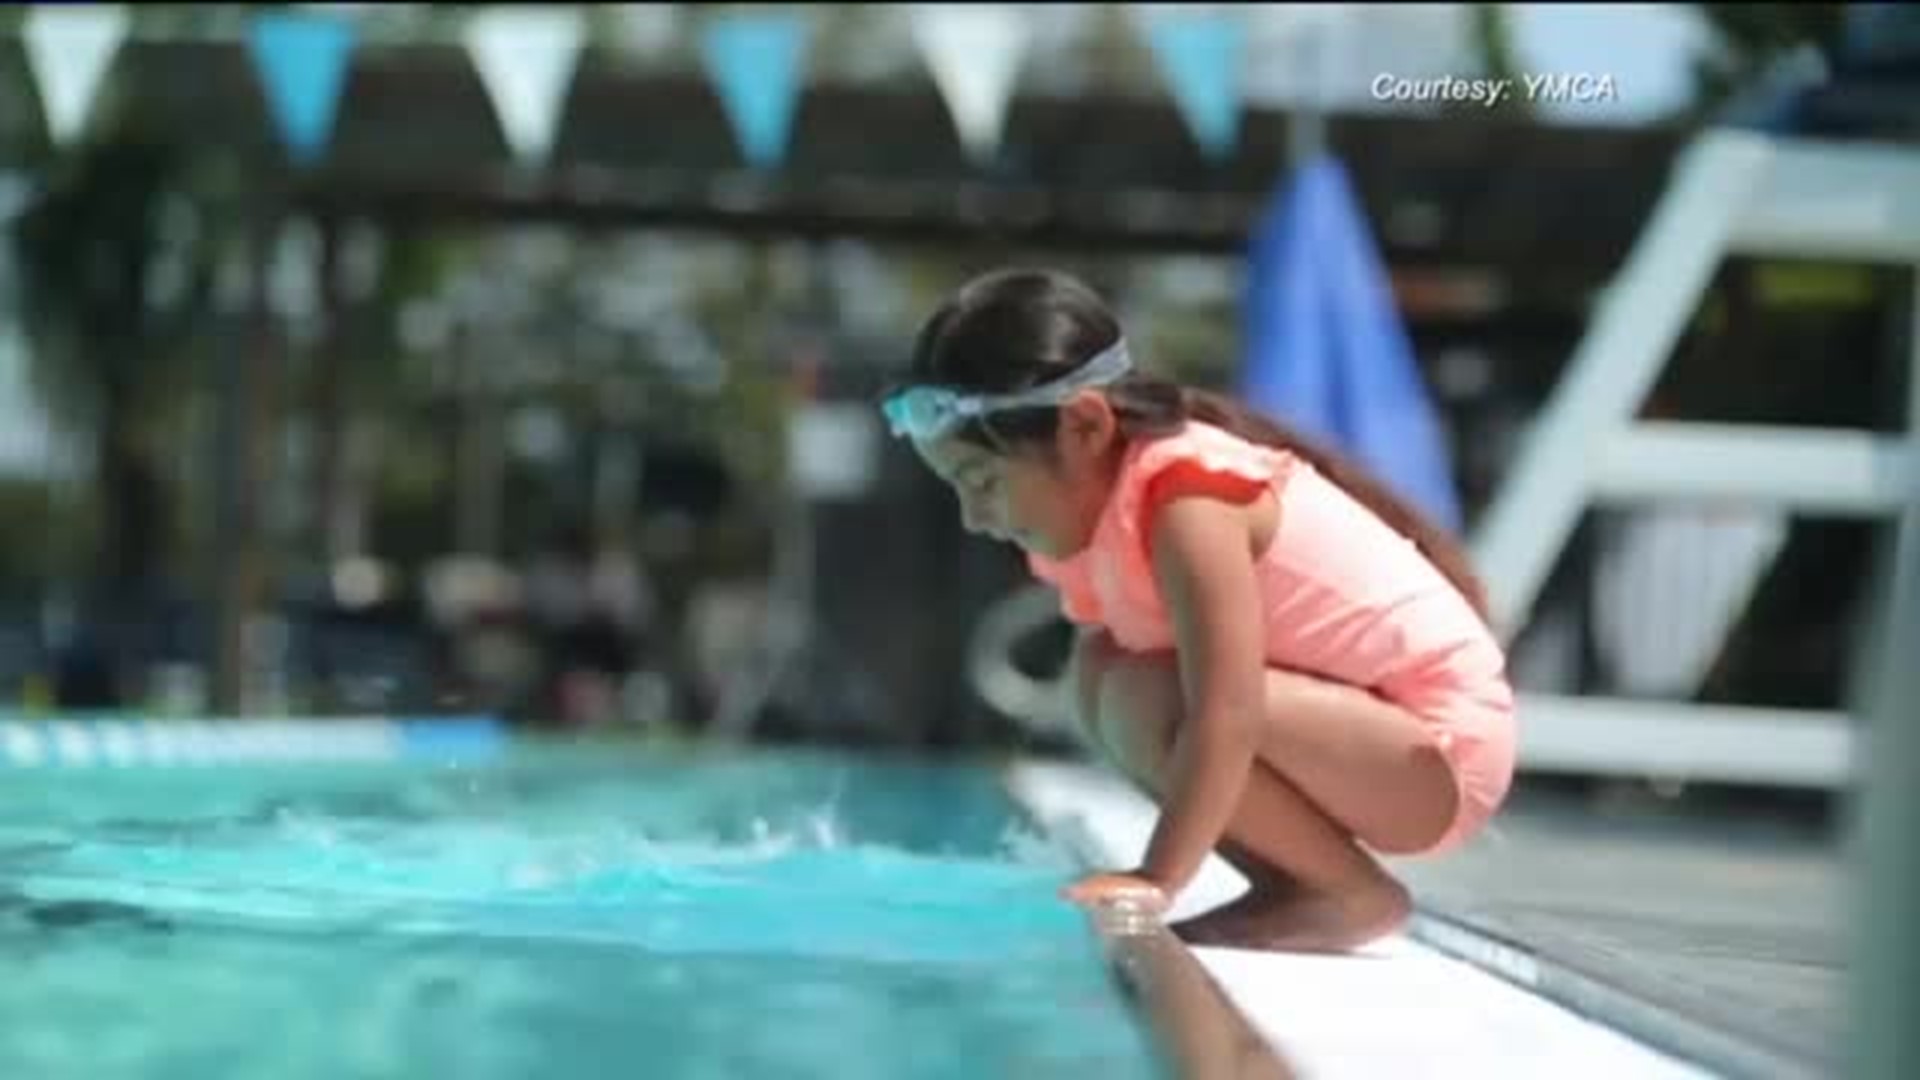 Making a Splash for Safety: Lifeguard Training Info and Free Swim Lessons